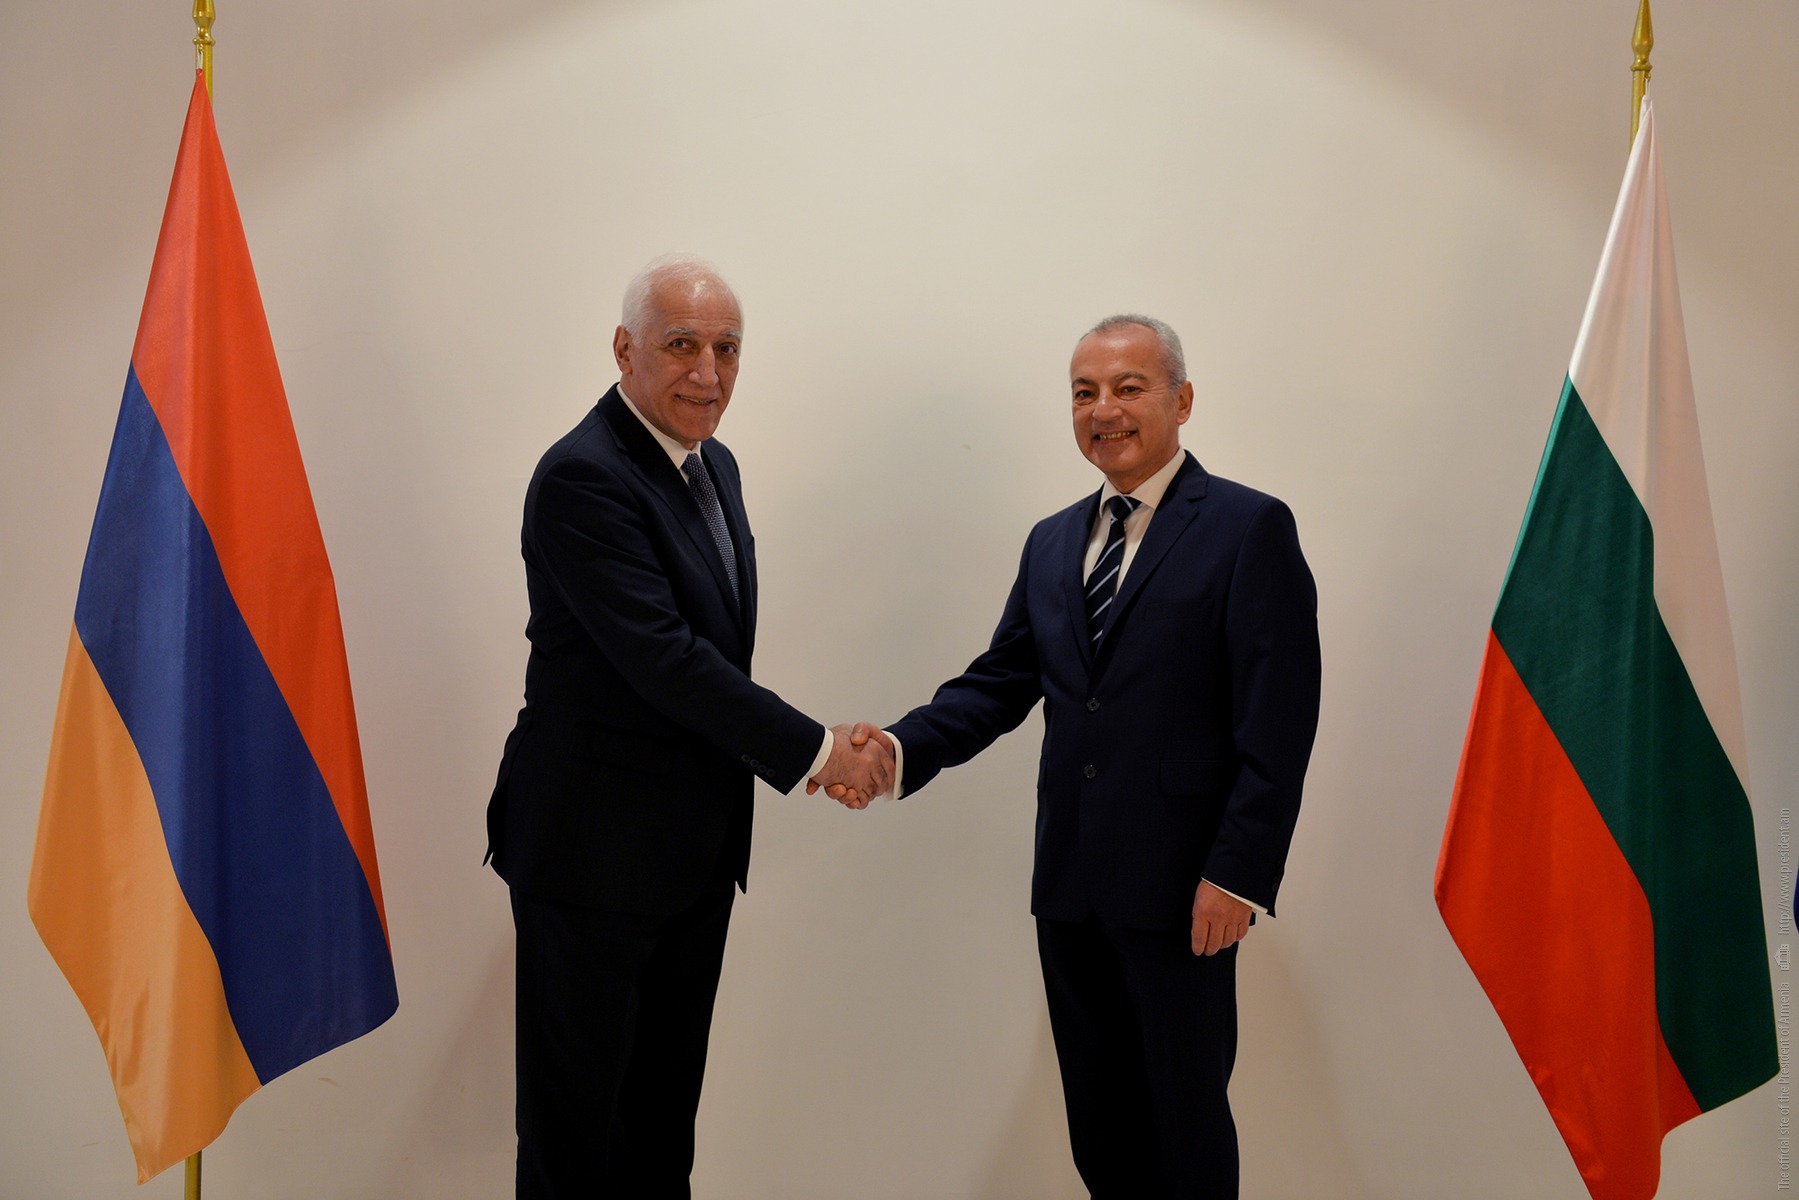 President Vahagn Khachaturyan had a meeting with the Prime Minister of Bulgaria Galab Donev